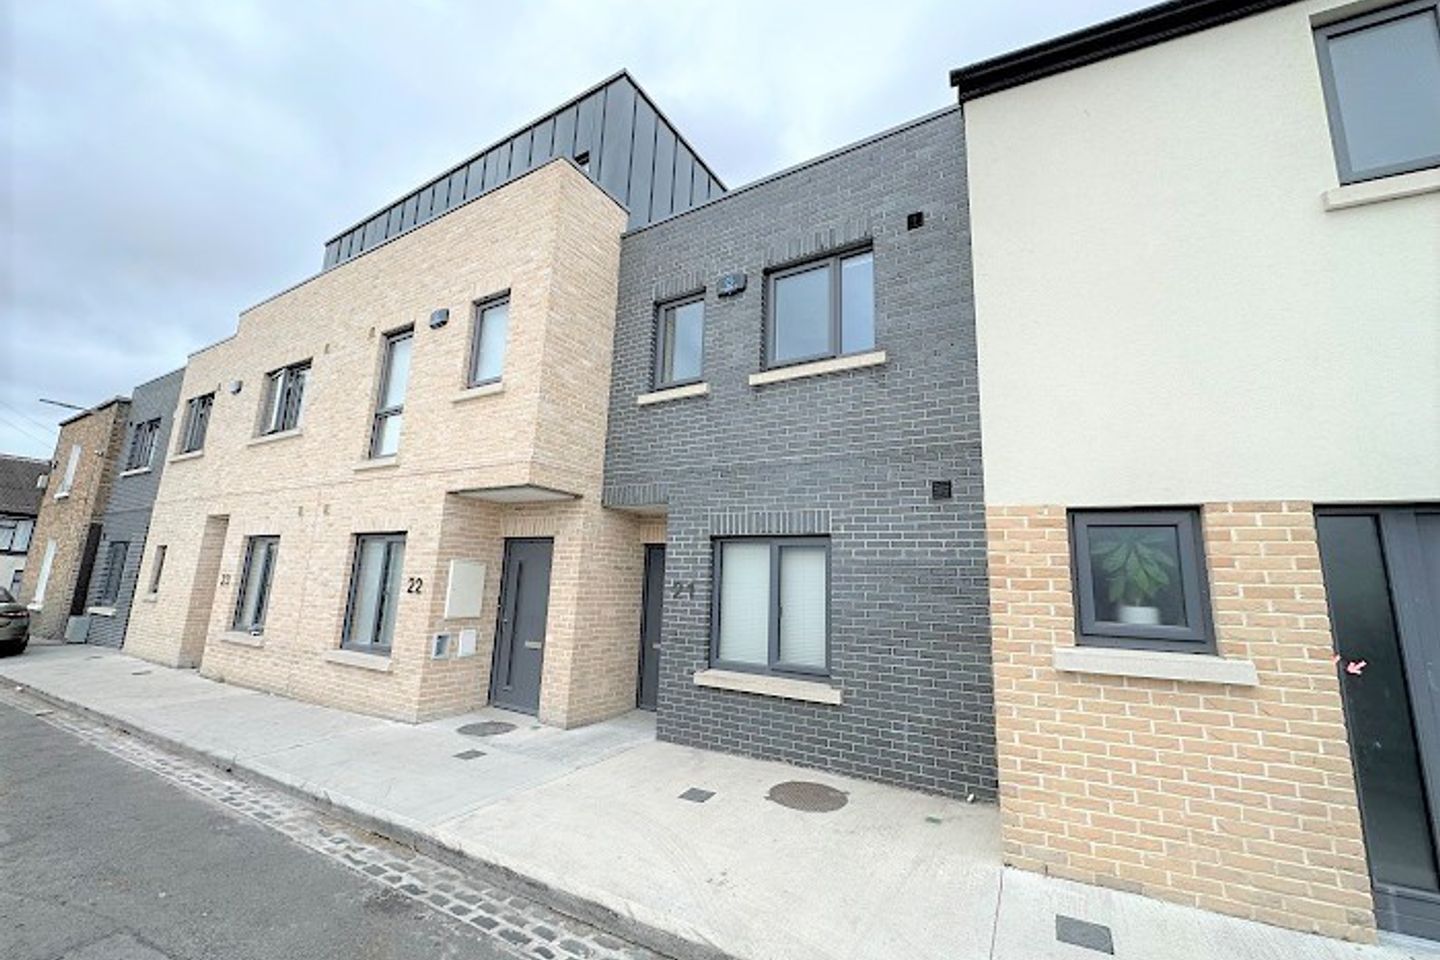 21-25 Arbour Place, Investment Opportunity of 5 Contemporary 2, 3, & 4 Bed Townhouses, Stoneybatter, Dublin 7